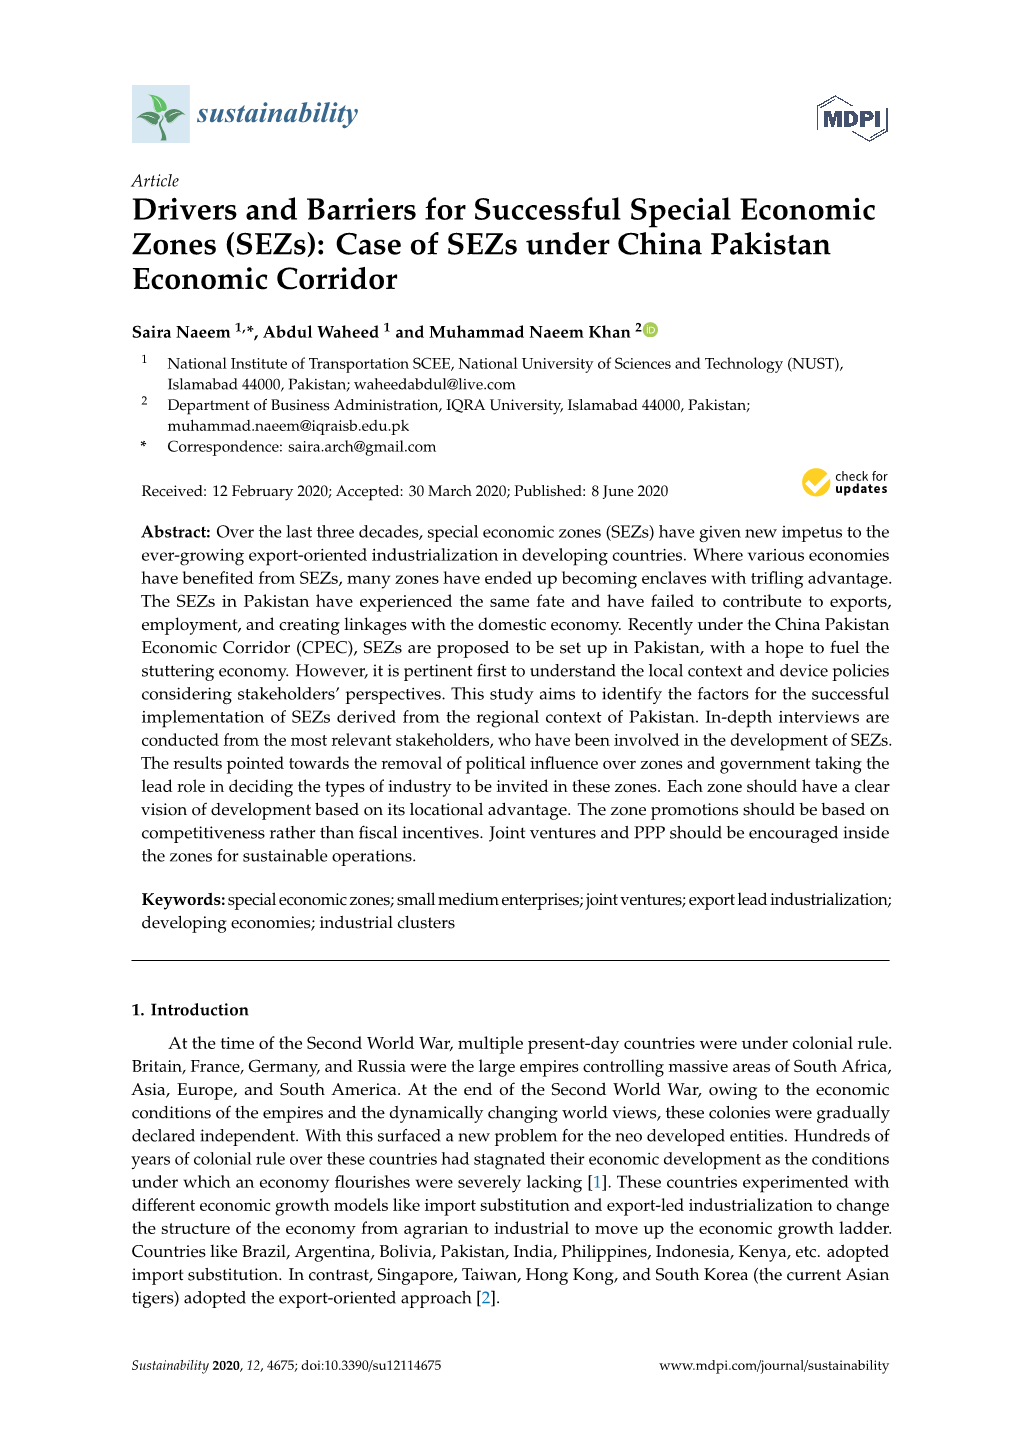 Drivers and Barriers for Successful Special Economic Zones (Sezs): Case of Sezs Under China Pakistan Economic Corridor